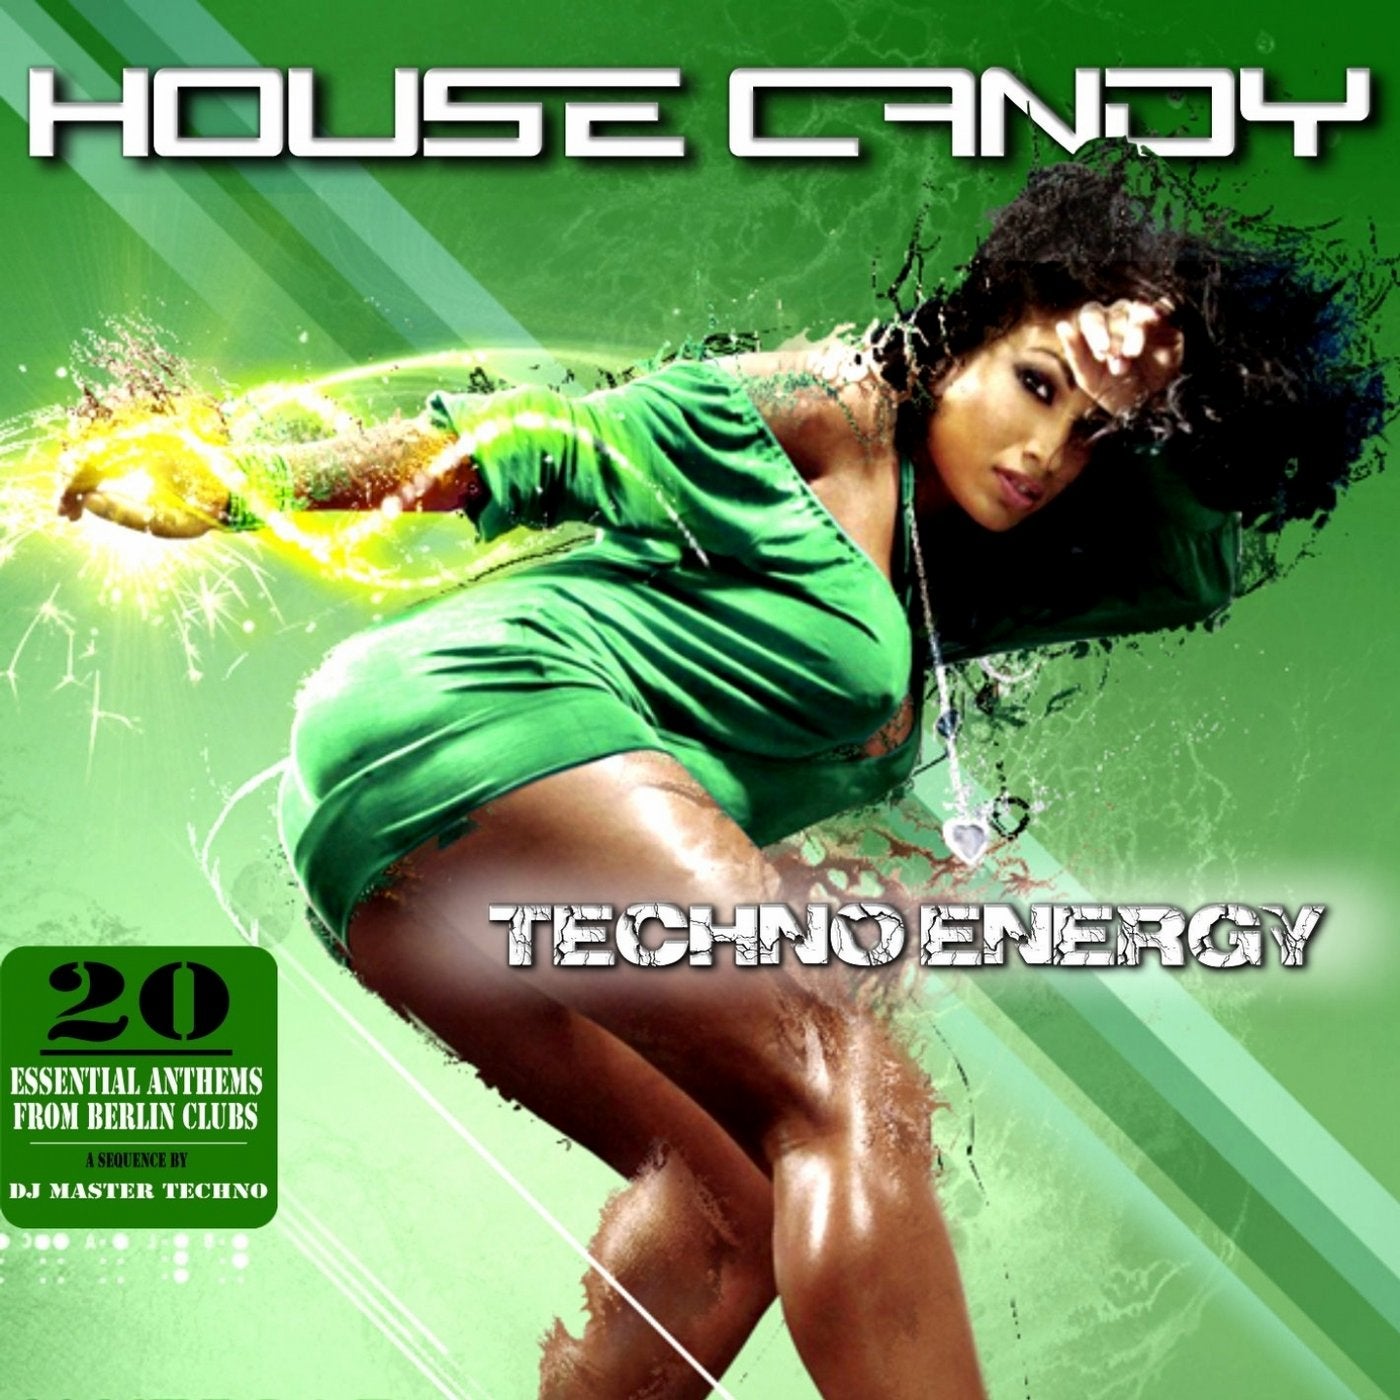 House Candy: Techno Energy (20 Essential Anthems from Berlin Clubs - A Sequence by DJ Master Techno)